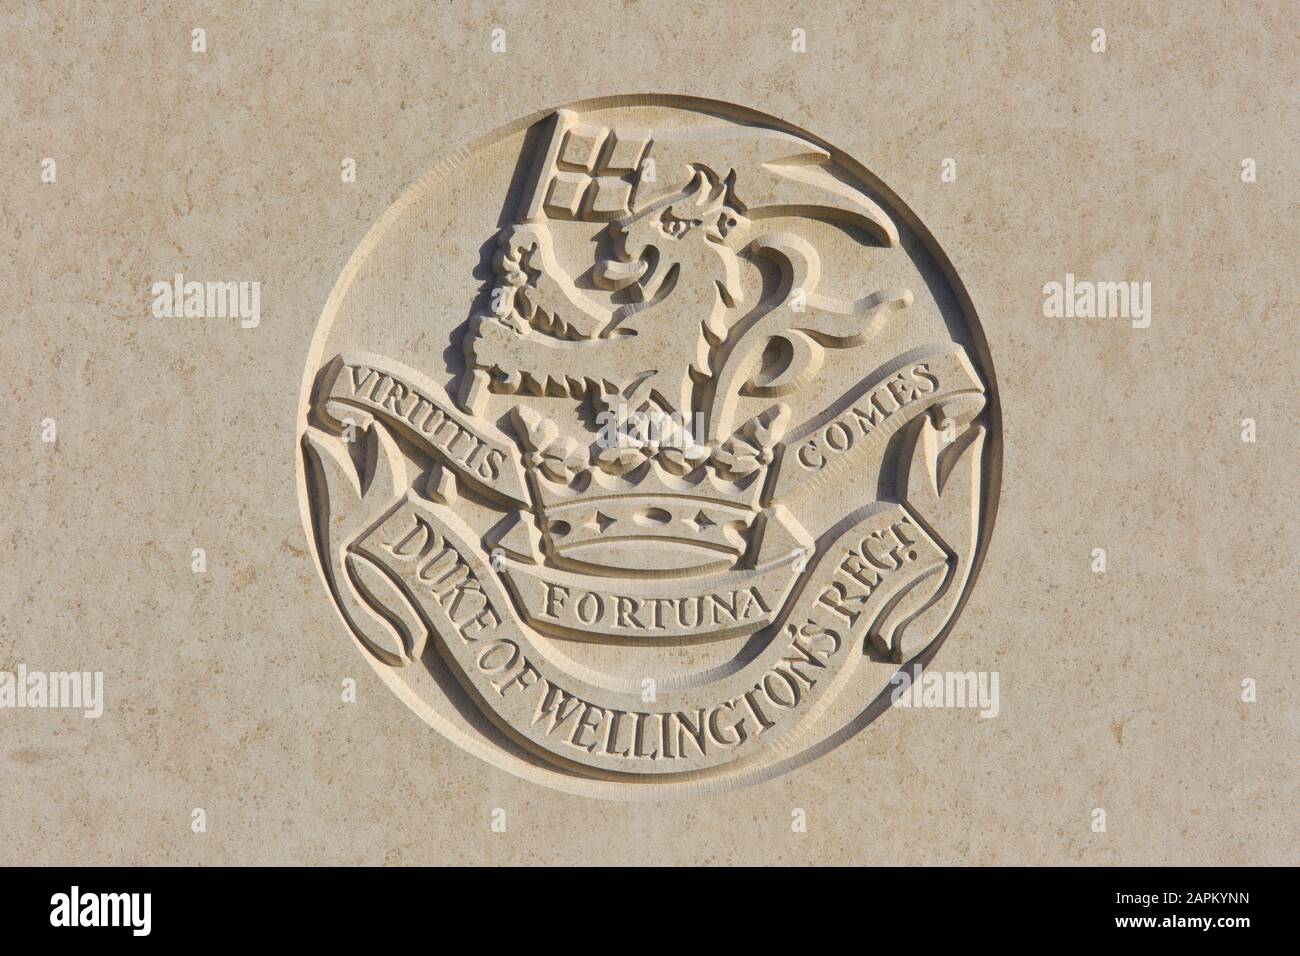 The Duke of Wellington's Regiment (West Riding) (1702-2006) regimental emblem on a World War I headstone at Tyne Cot Cemetery in Zonnebeke, Belgium Stock Photo